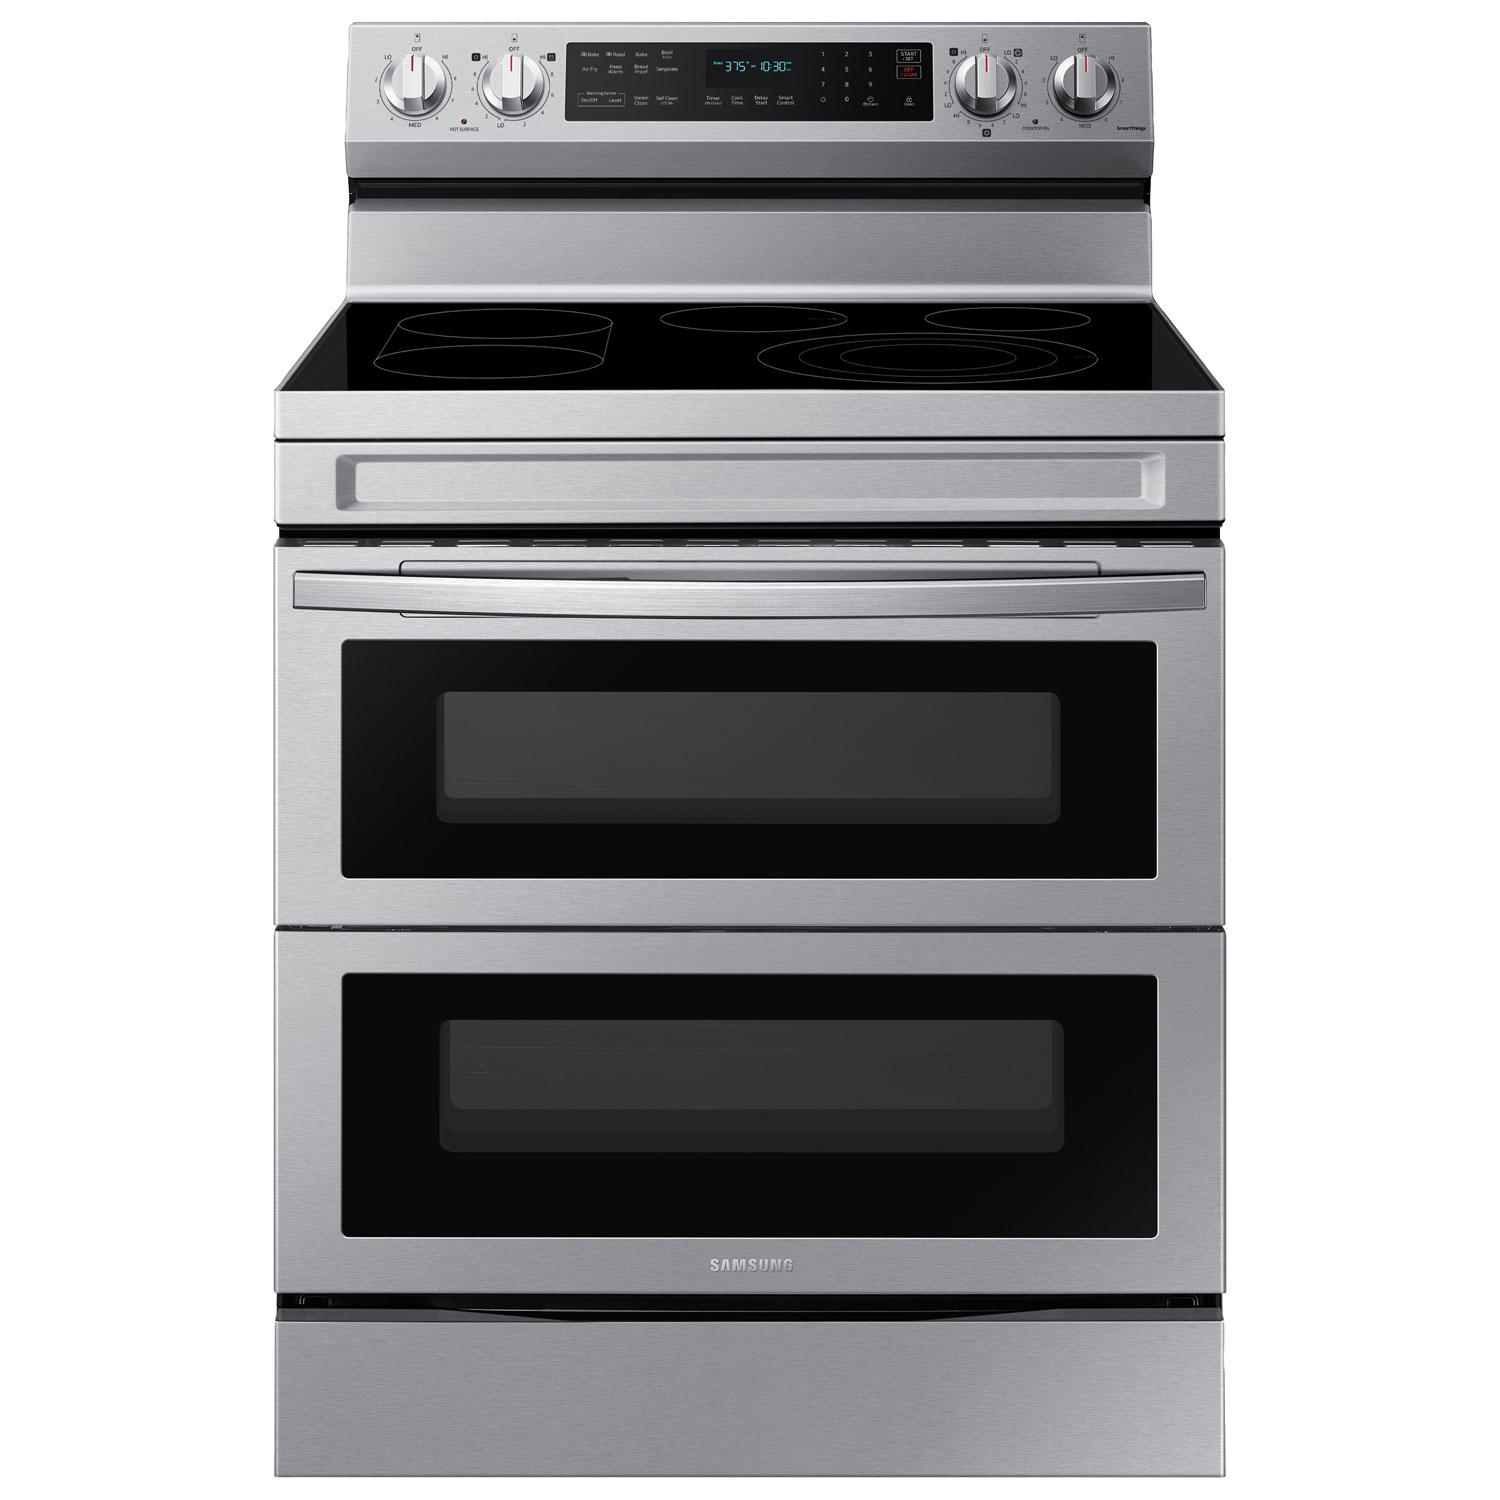 Samsung 30" 6.3 Cu. Ft. Double Oven 5-Element Freestanding Electric Range (NE63A6751SS/AC) - Stainless